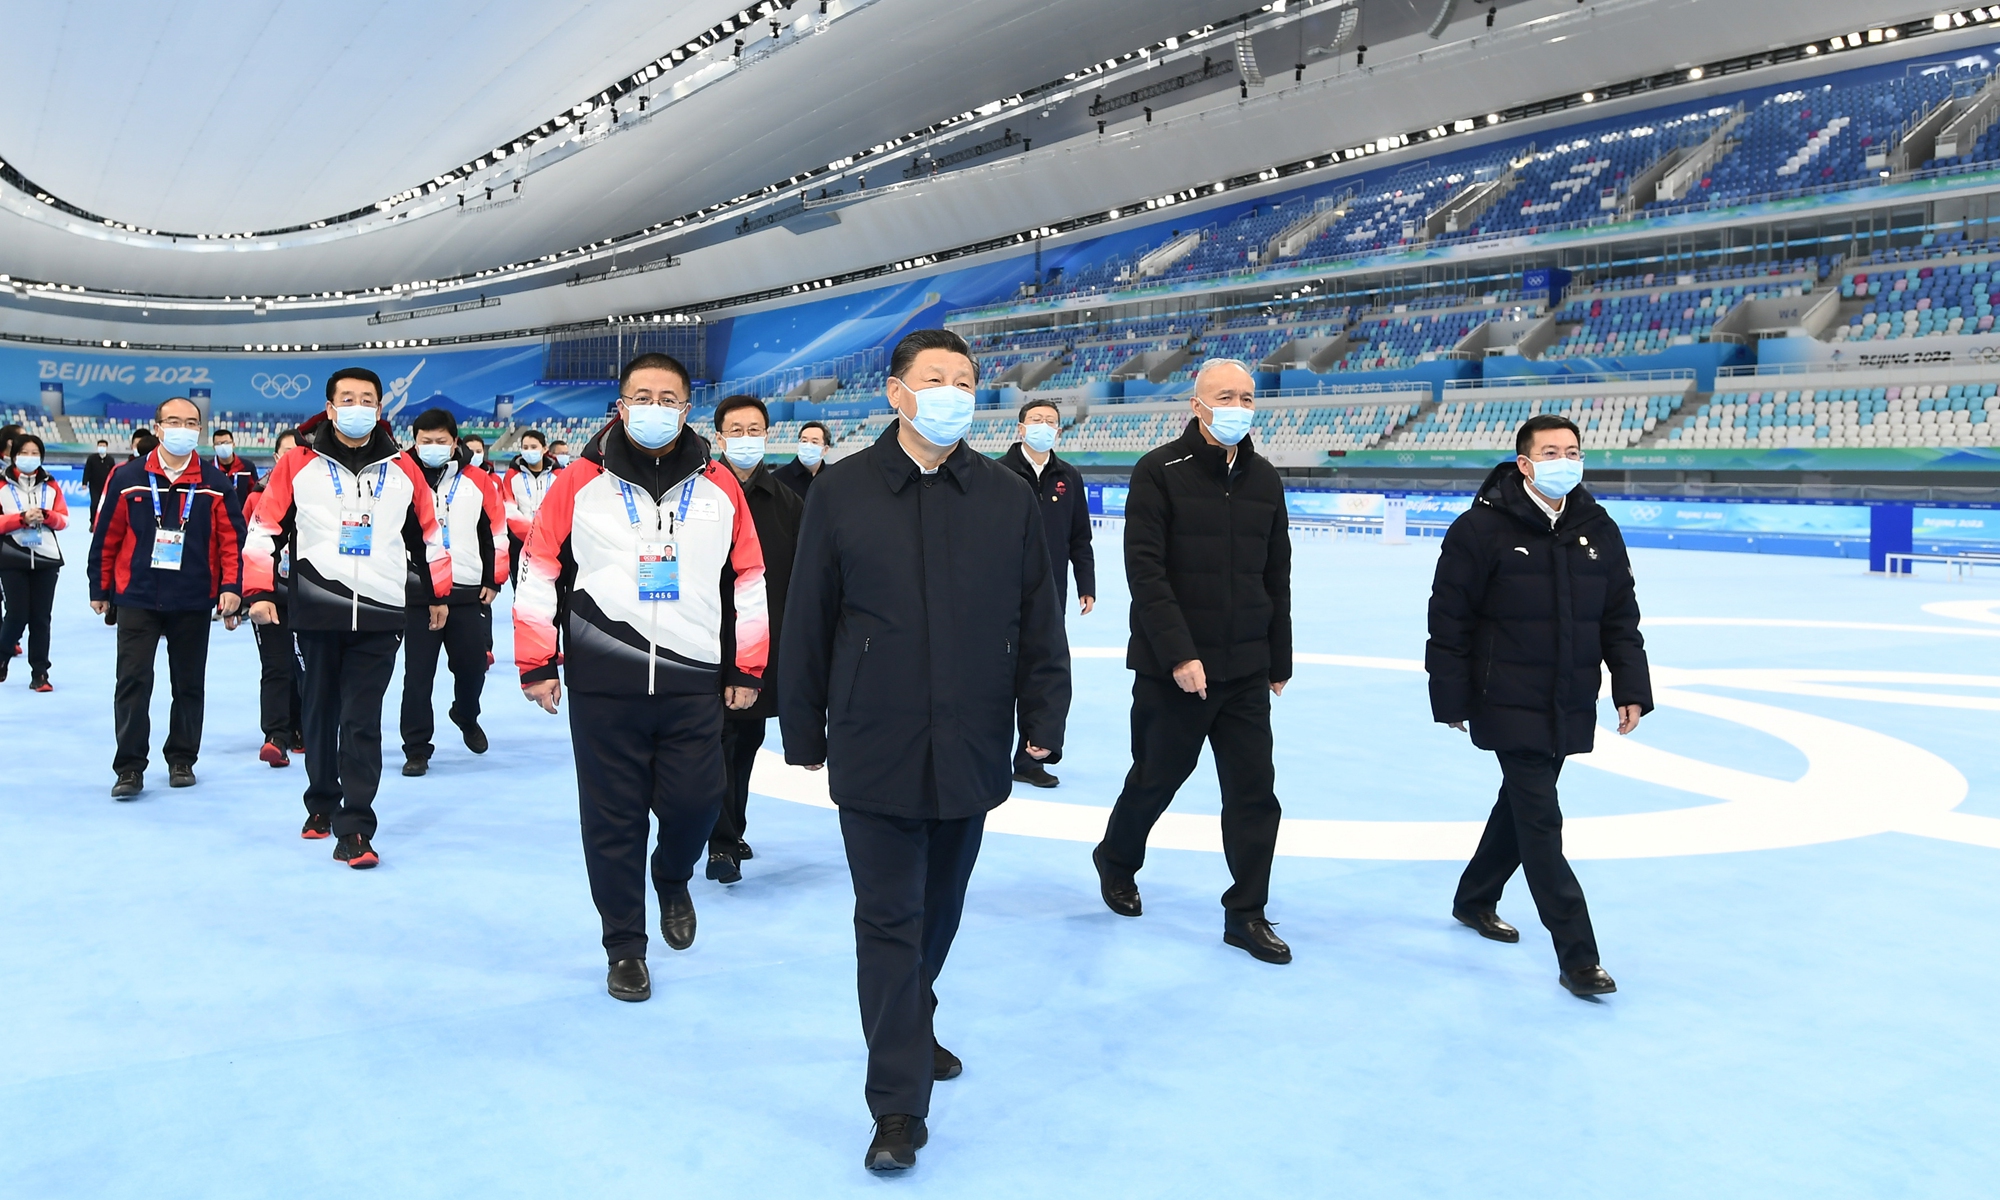 Chinese President Xi Jinping, also general secretary of the Communist Party of China Central Committee and chairman of the Central Military Commission, visits the National Speed Skating Oval in Beijing on January 4, 2022. Xi inspected the preparations for the 2022 Olympic and Paralympic Winter Games in Beijing on January 4, 2022. Photo: Xinhua